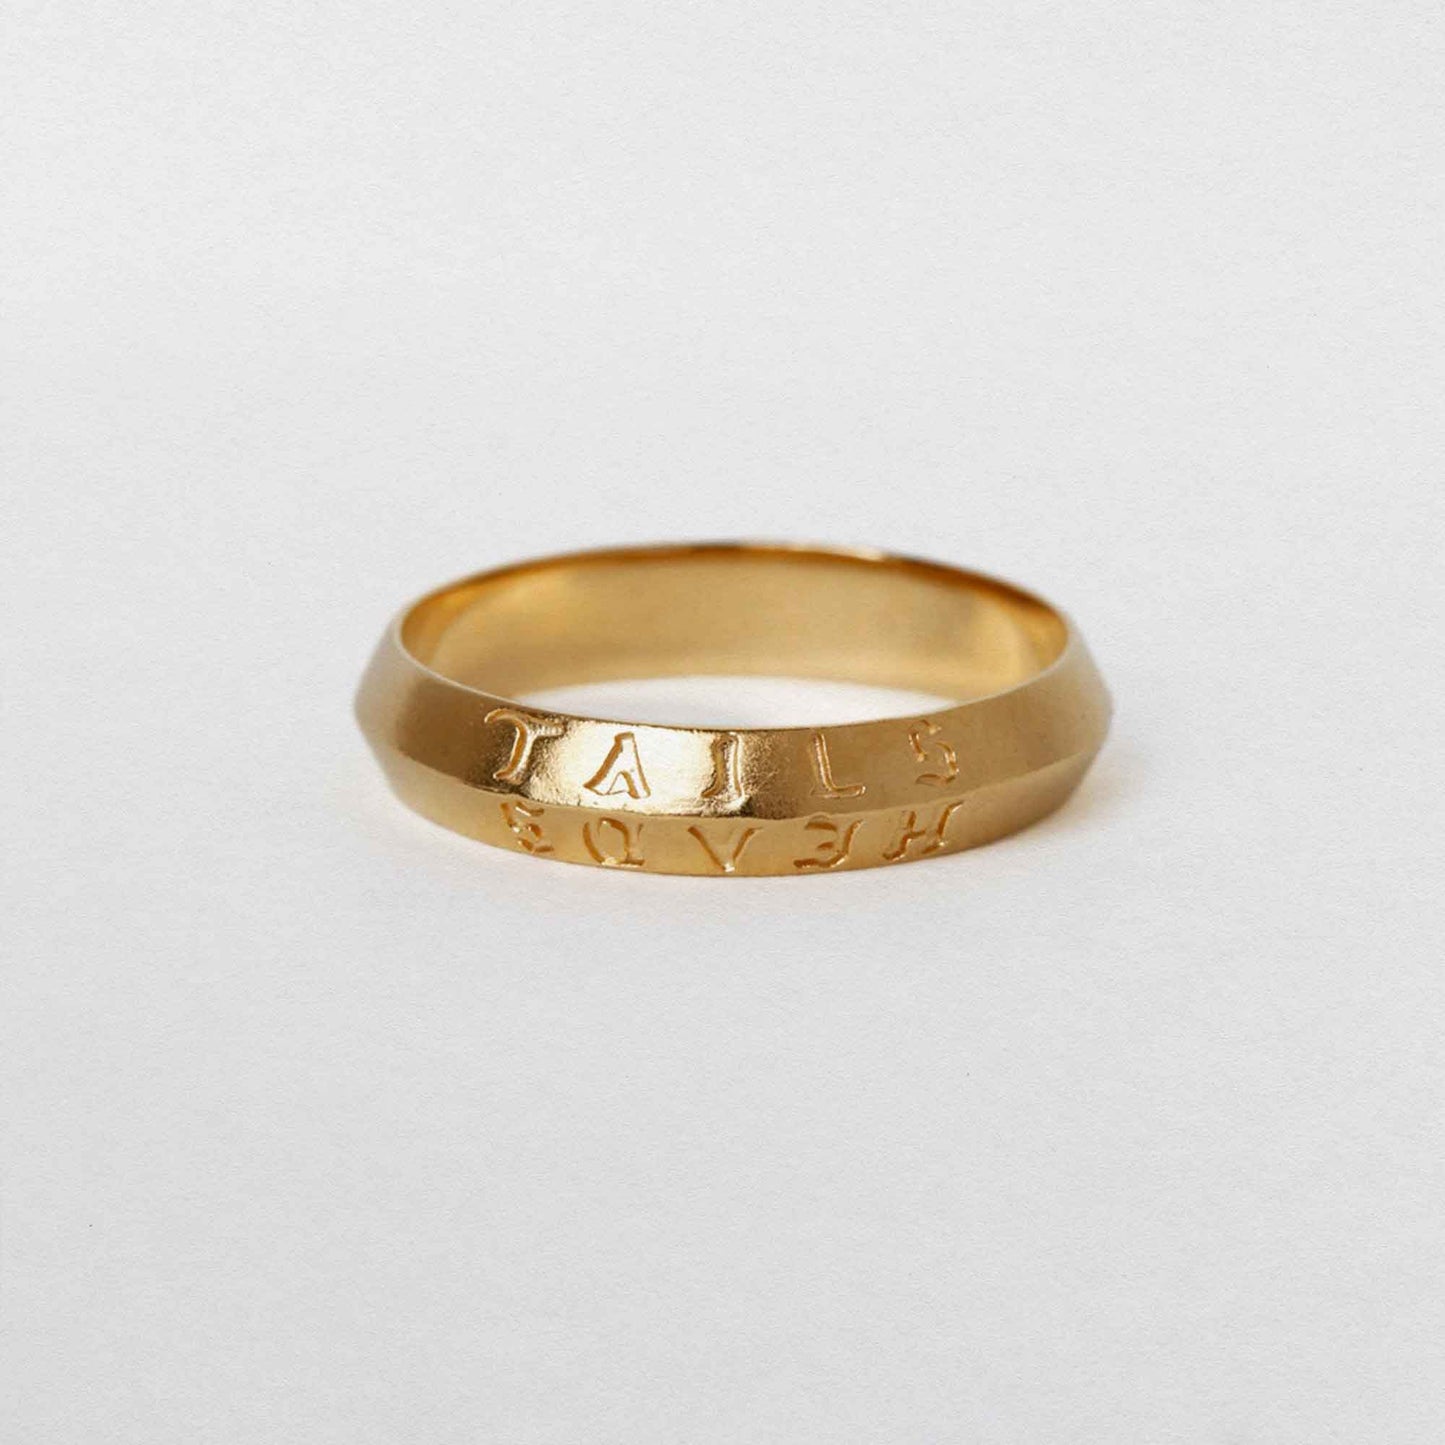 heads + tails engraved on a 22CT gold vermeil band ring